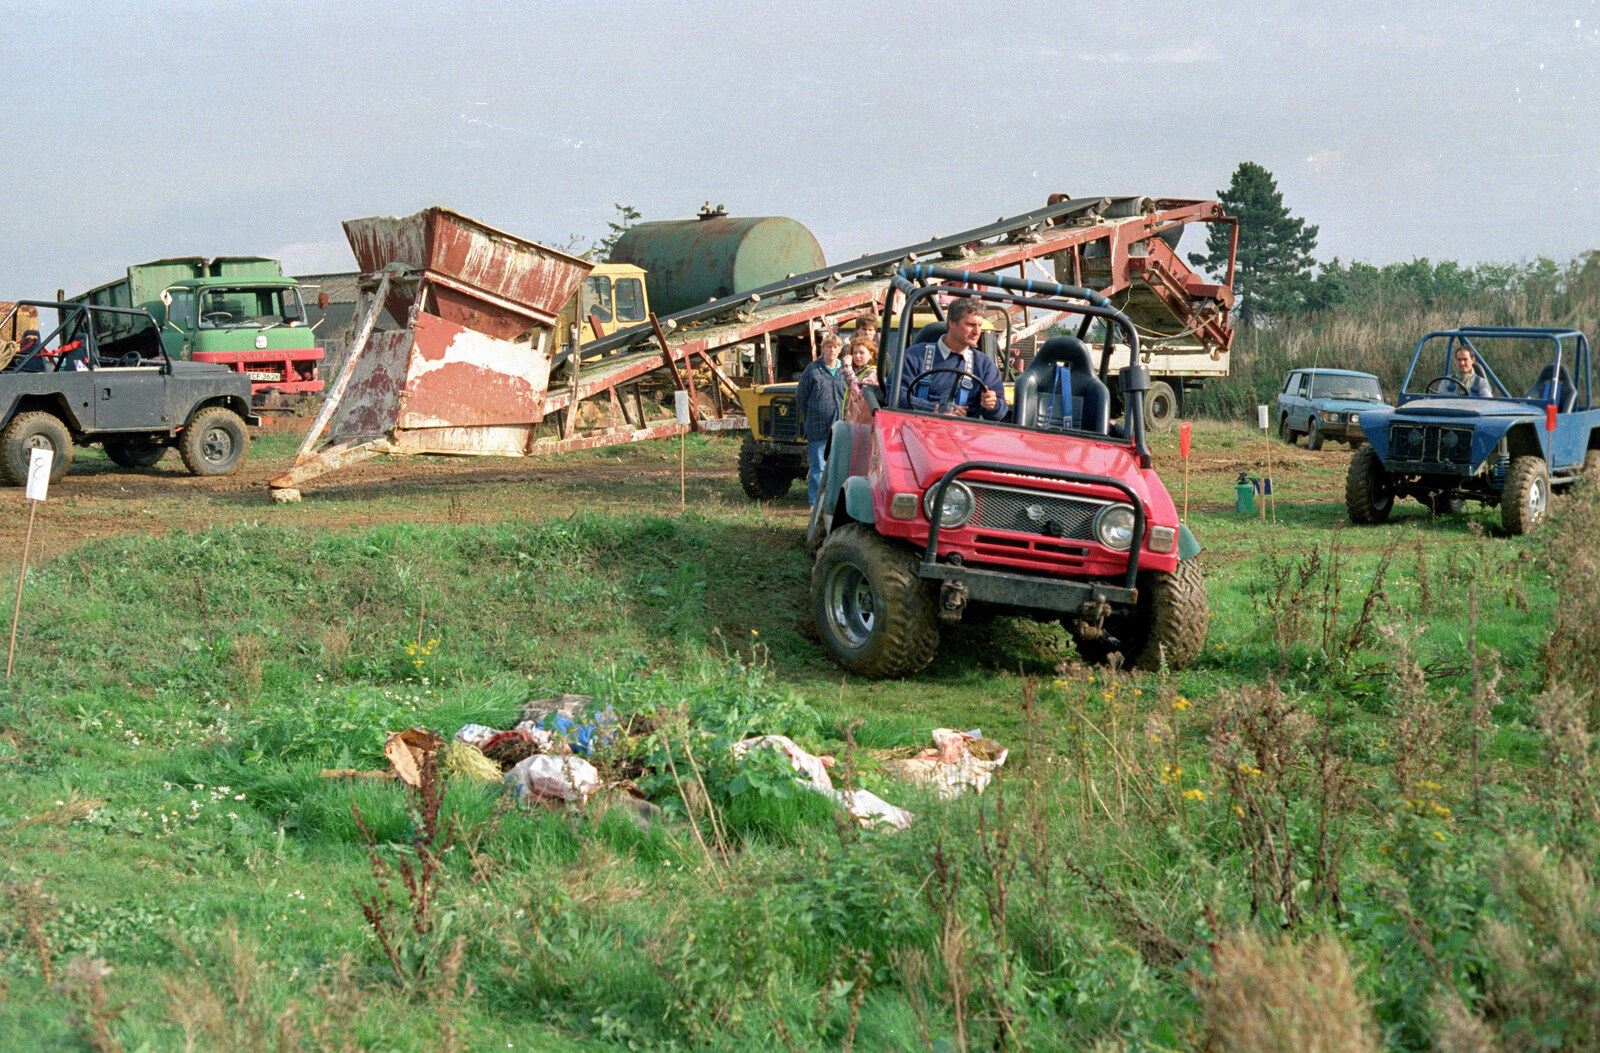 Off-Roading With Geoff and Brenda, Suffolk - 10th October 1994: Amongst the derelict machinery